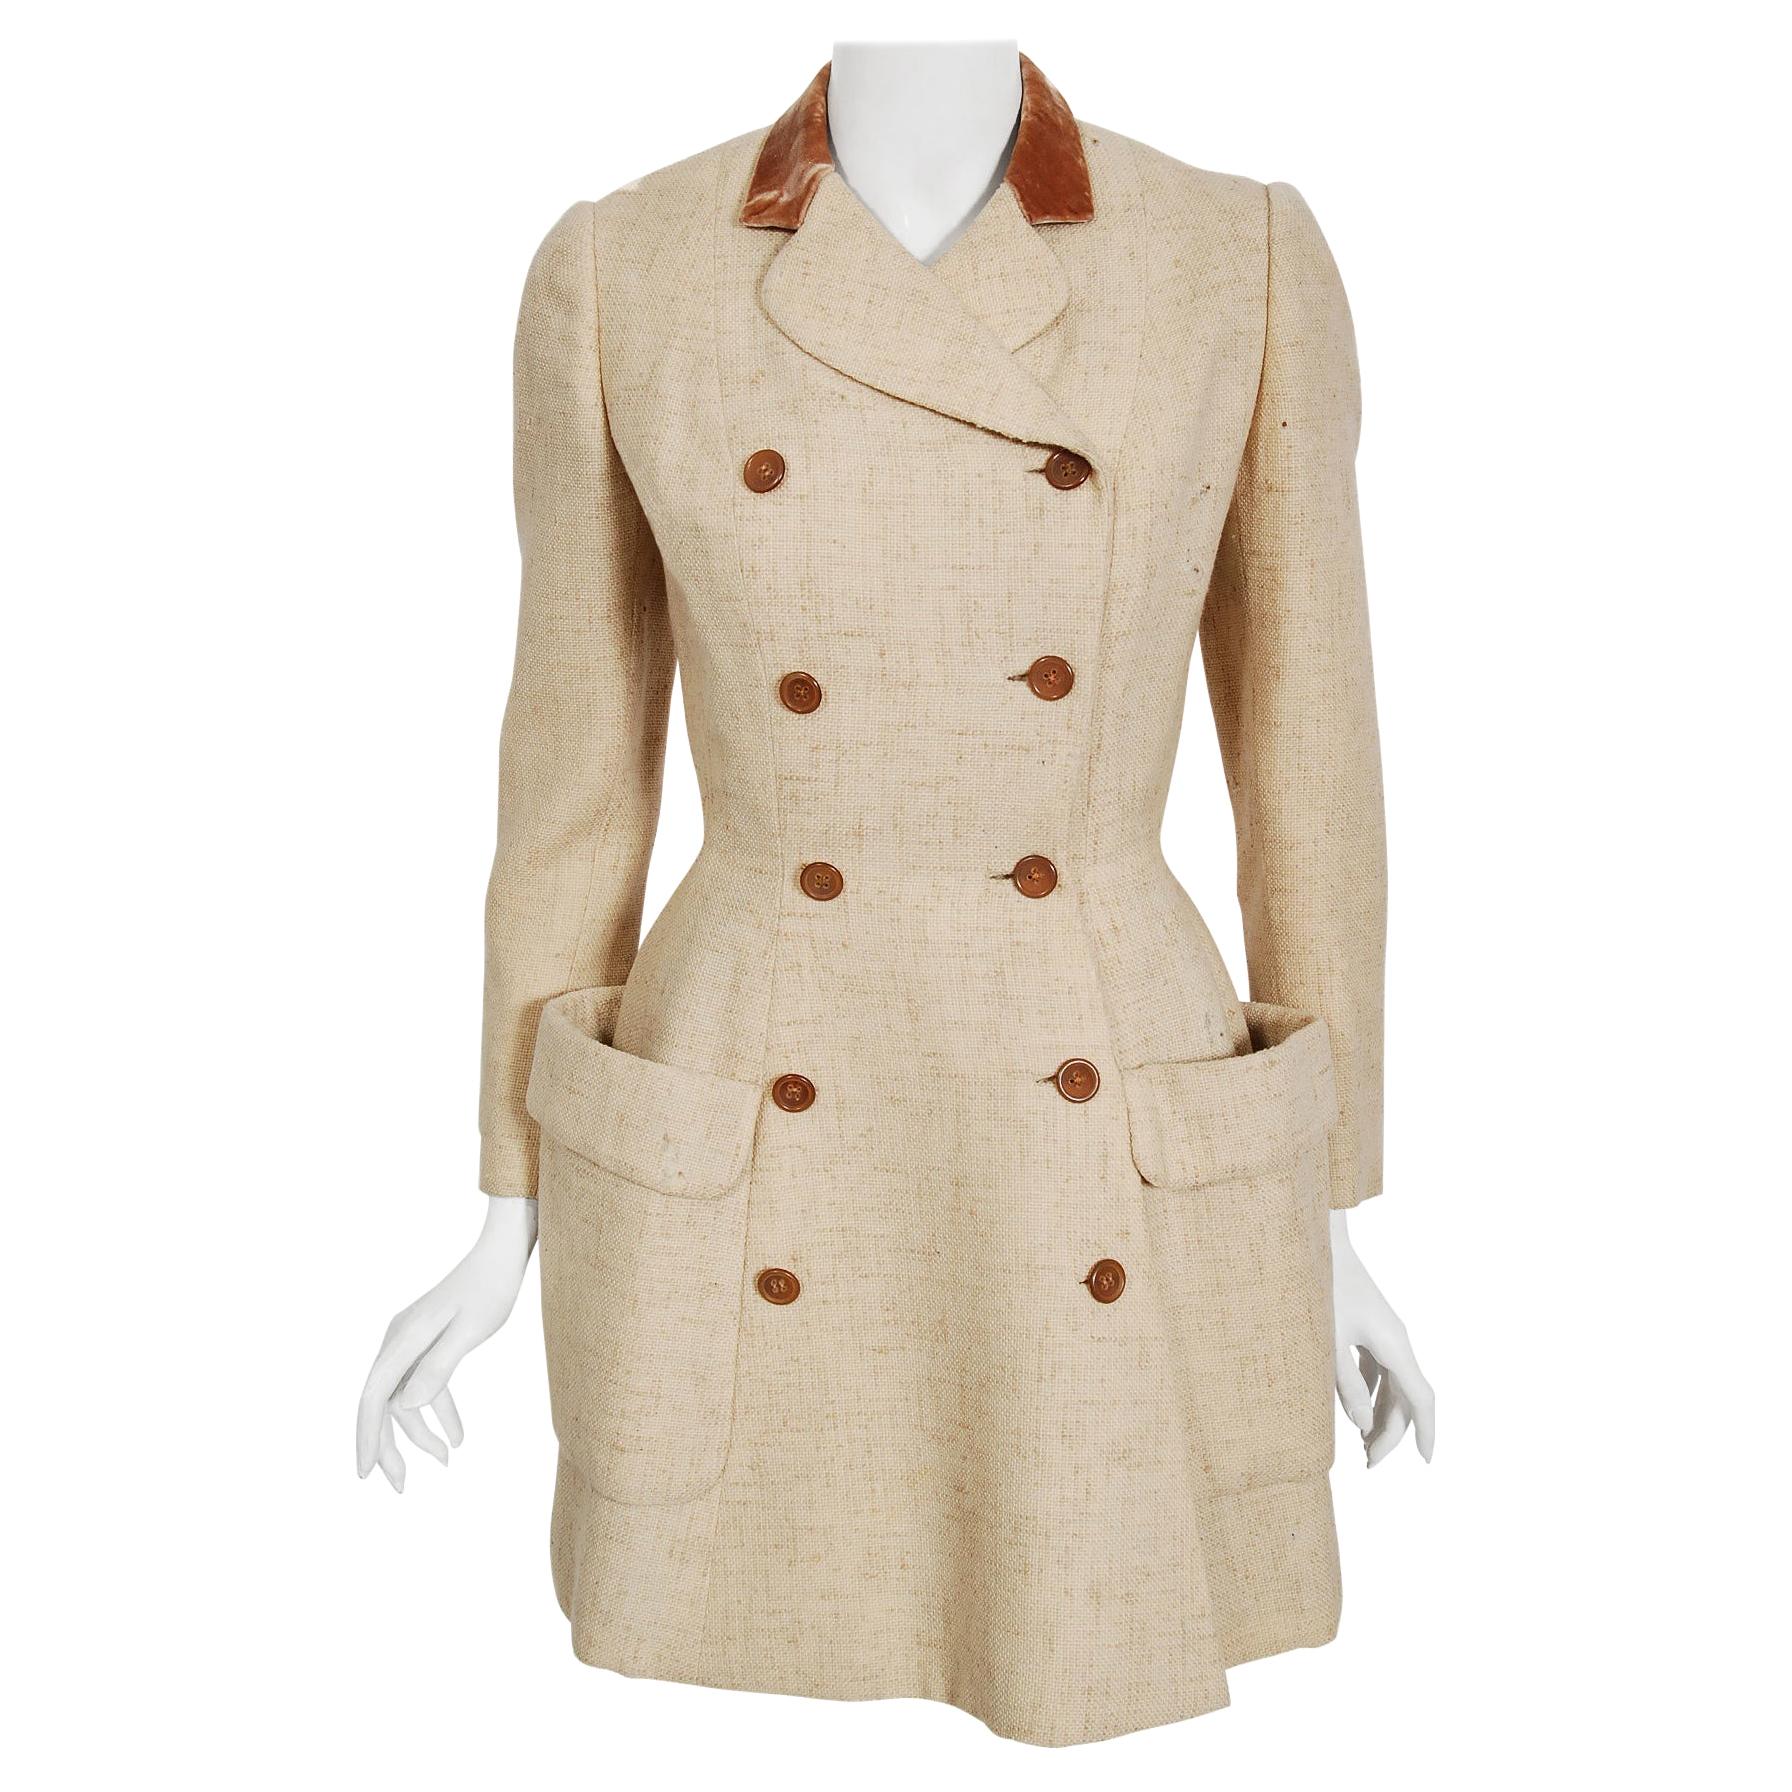 Vintage 1955 Traina-Norell Beige Wool Tweed Double Breasted Fitted Blazer Jacket